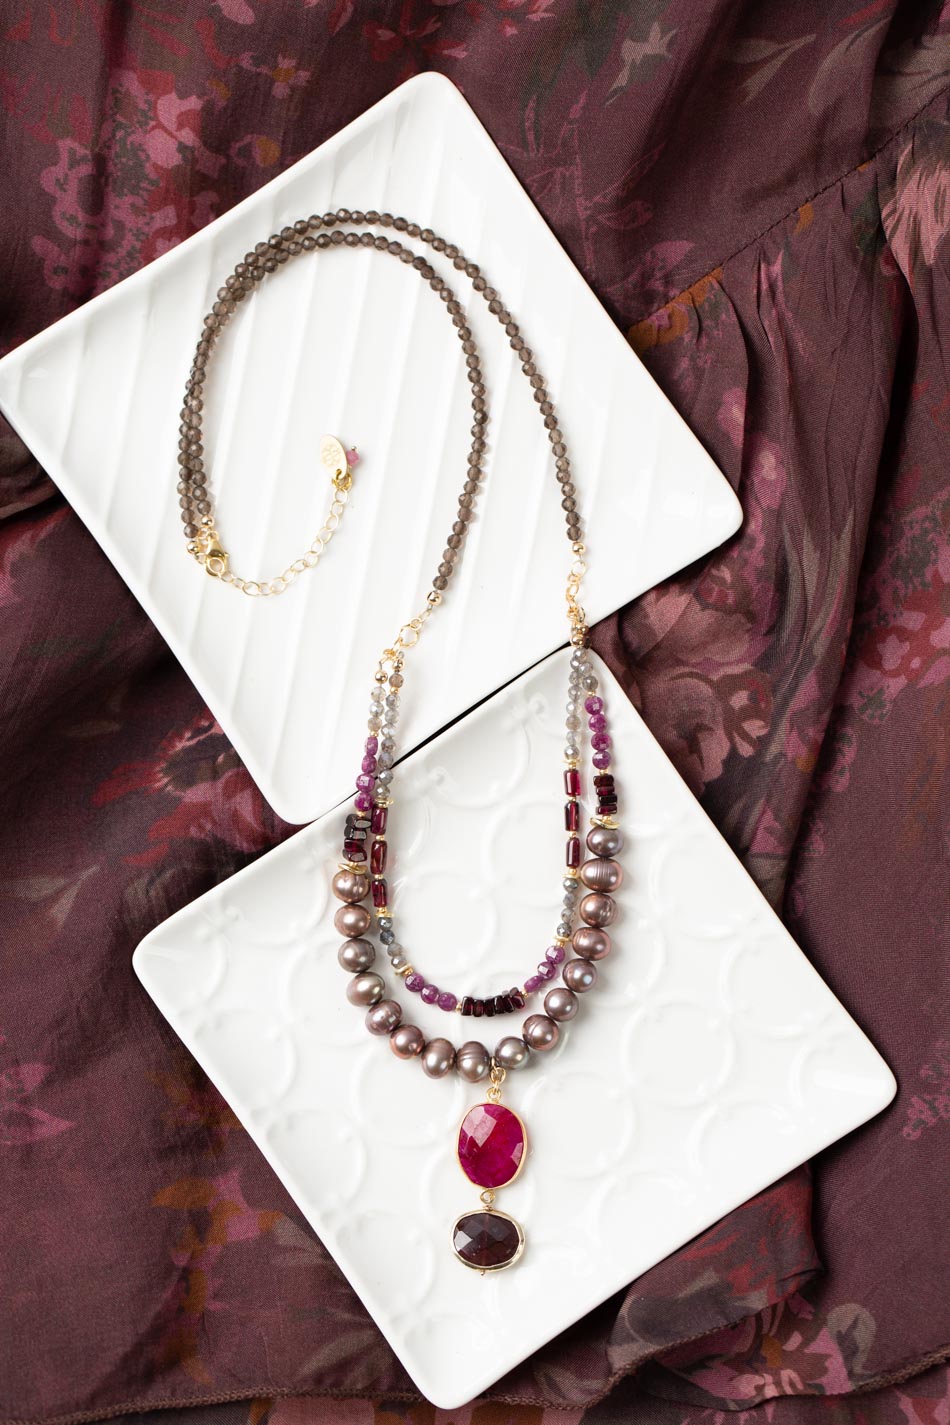 Decadence 23-25" Smoky Quartz, Garnet, Freshwater Pearl With Ruby Jade Cluster Necklace